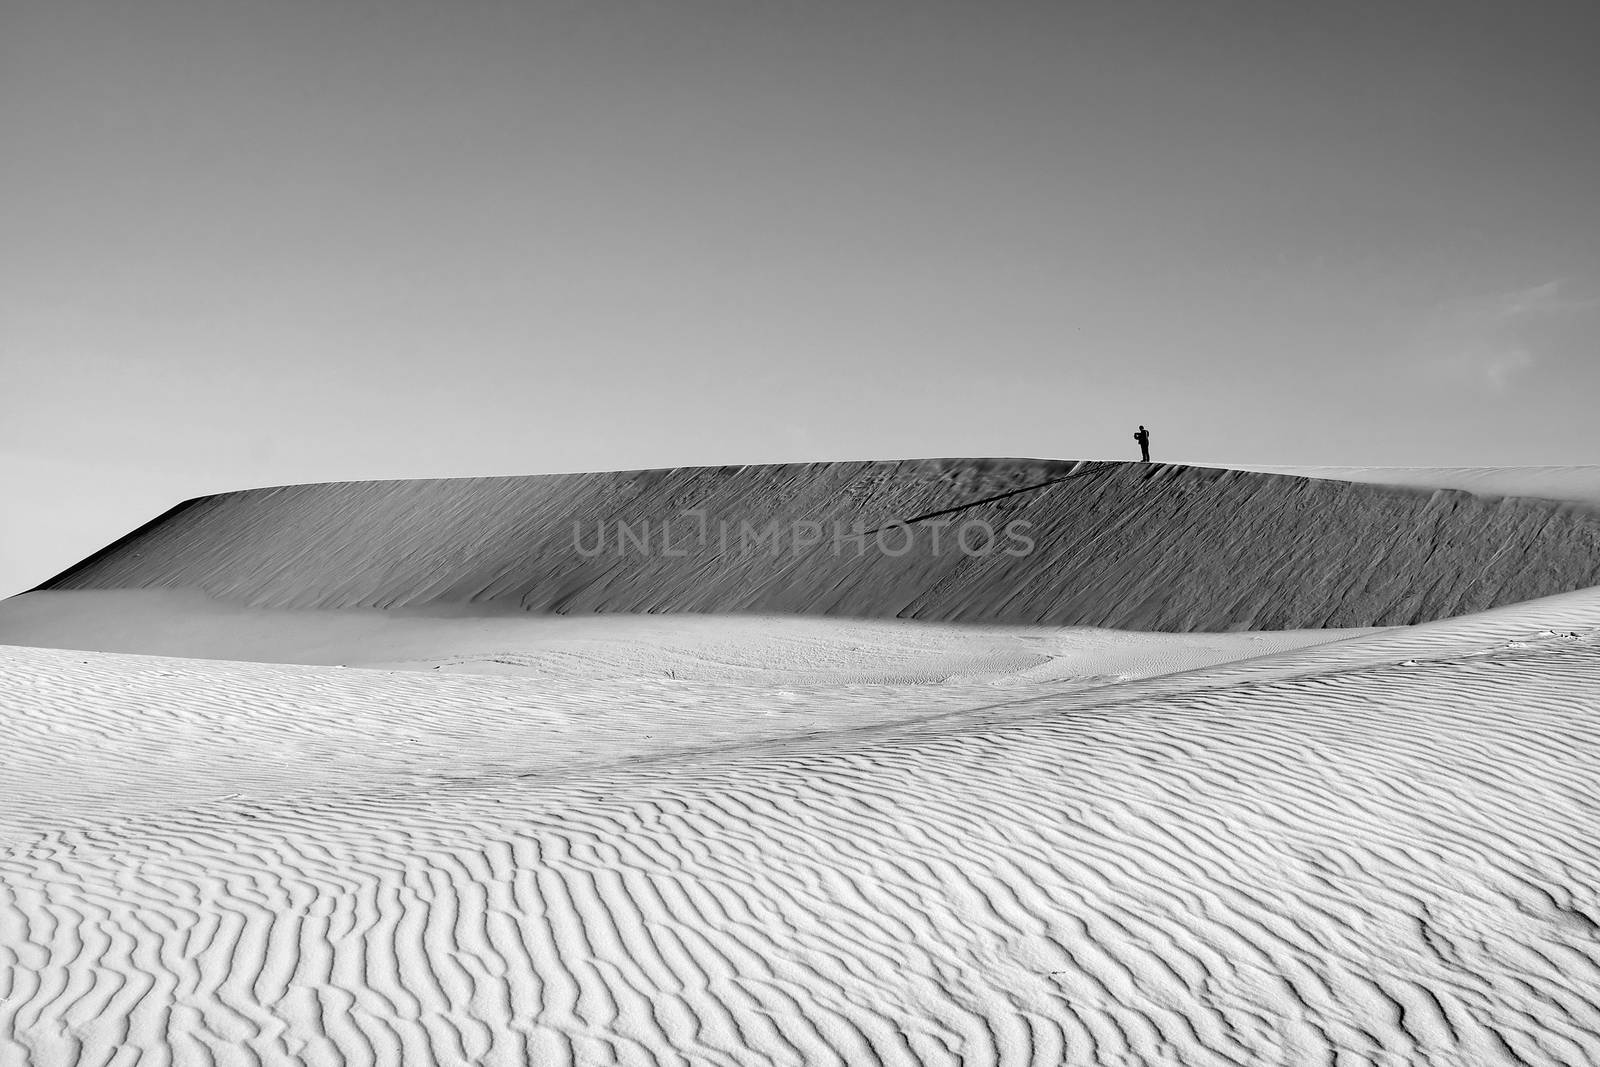 Life is the trip, lonely man enjoy calm scene on Vietnamese sand hill, sandhill with amazing shape in black and white tone in summertime, adventure travel in the choice of freedom young people